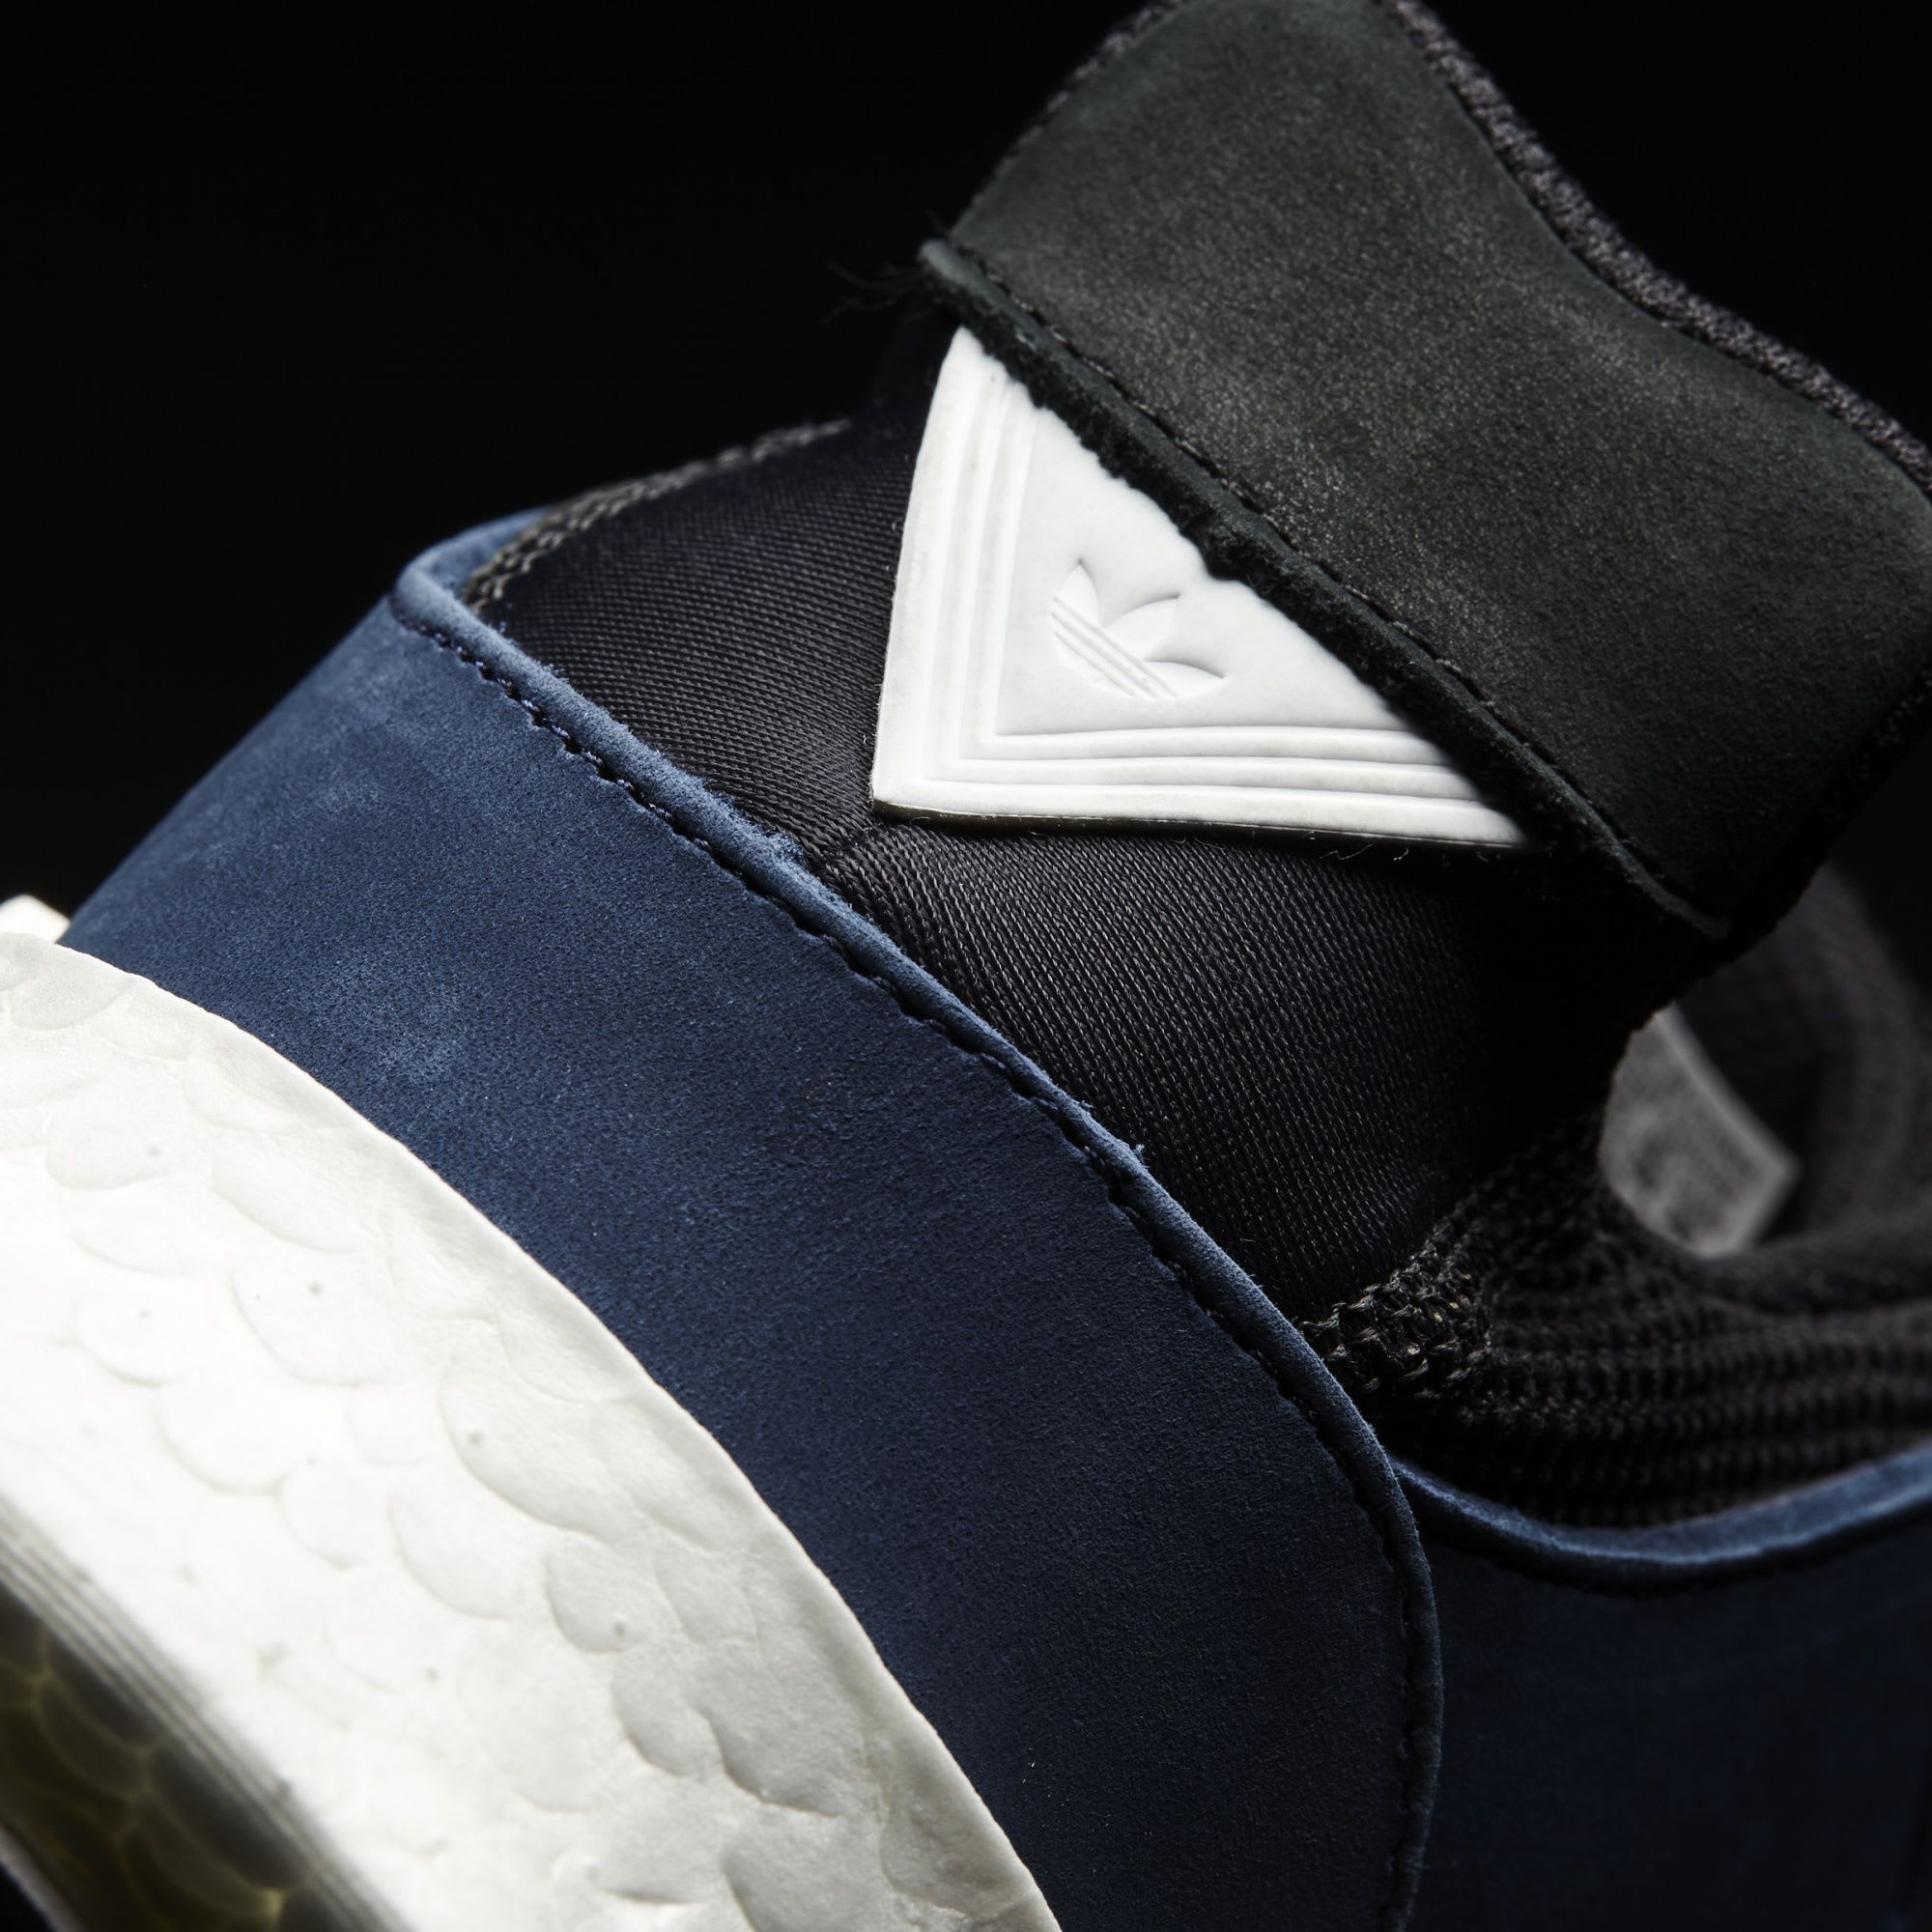 White Mountaineering x Adidas EQT Support 93-17 detail